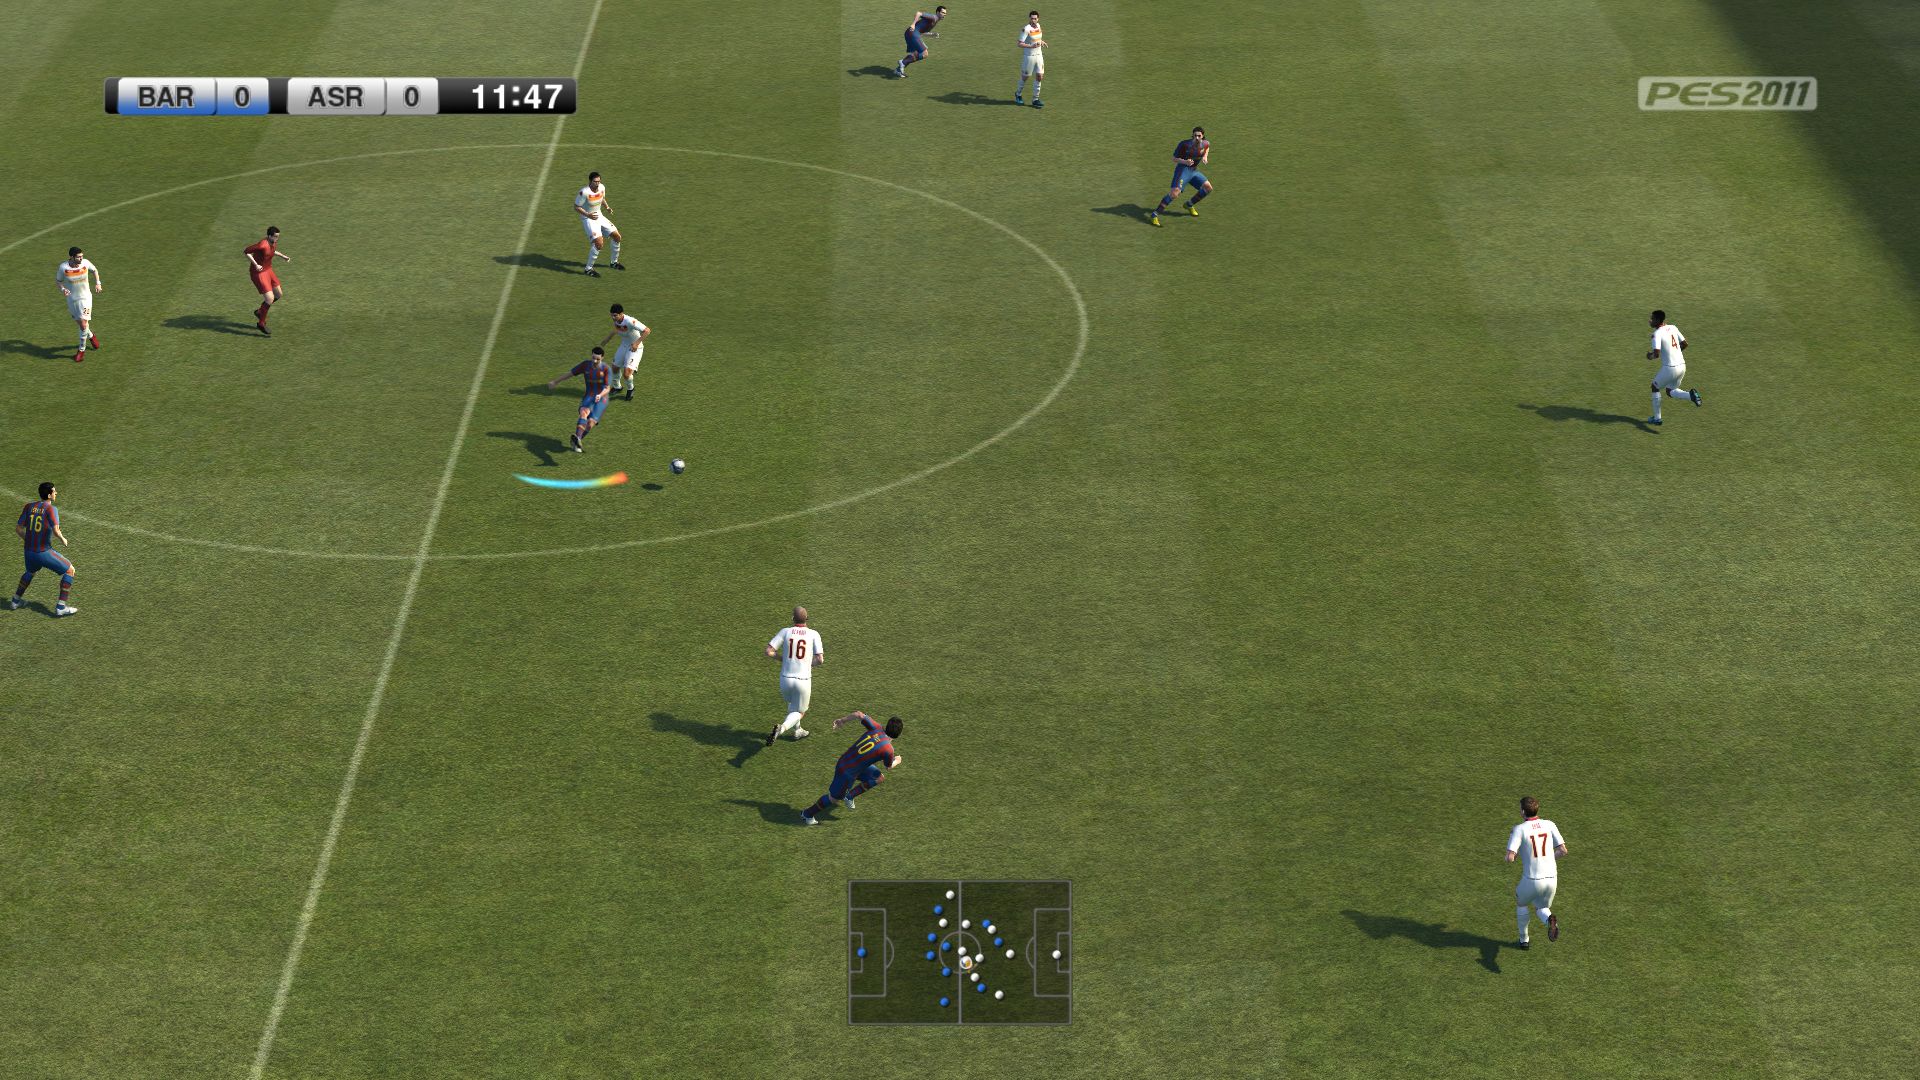 PES 2011 images - Image #2610 | New Game Network